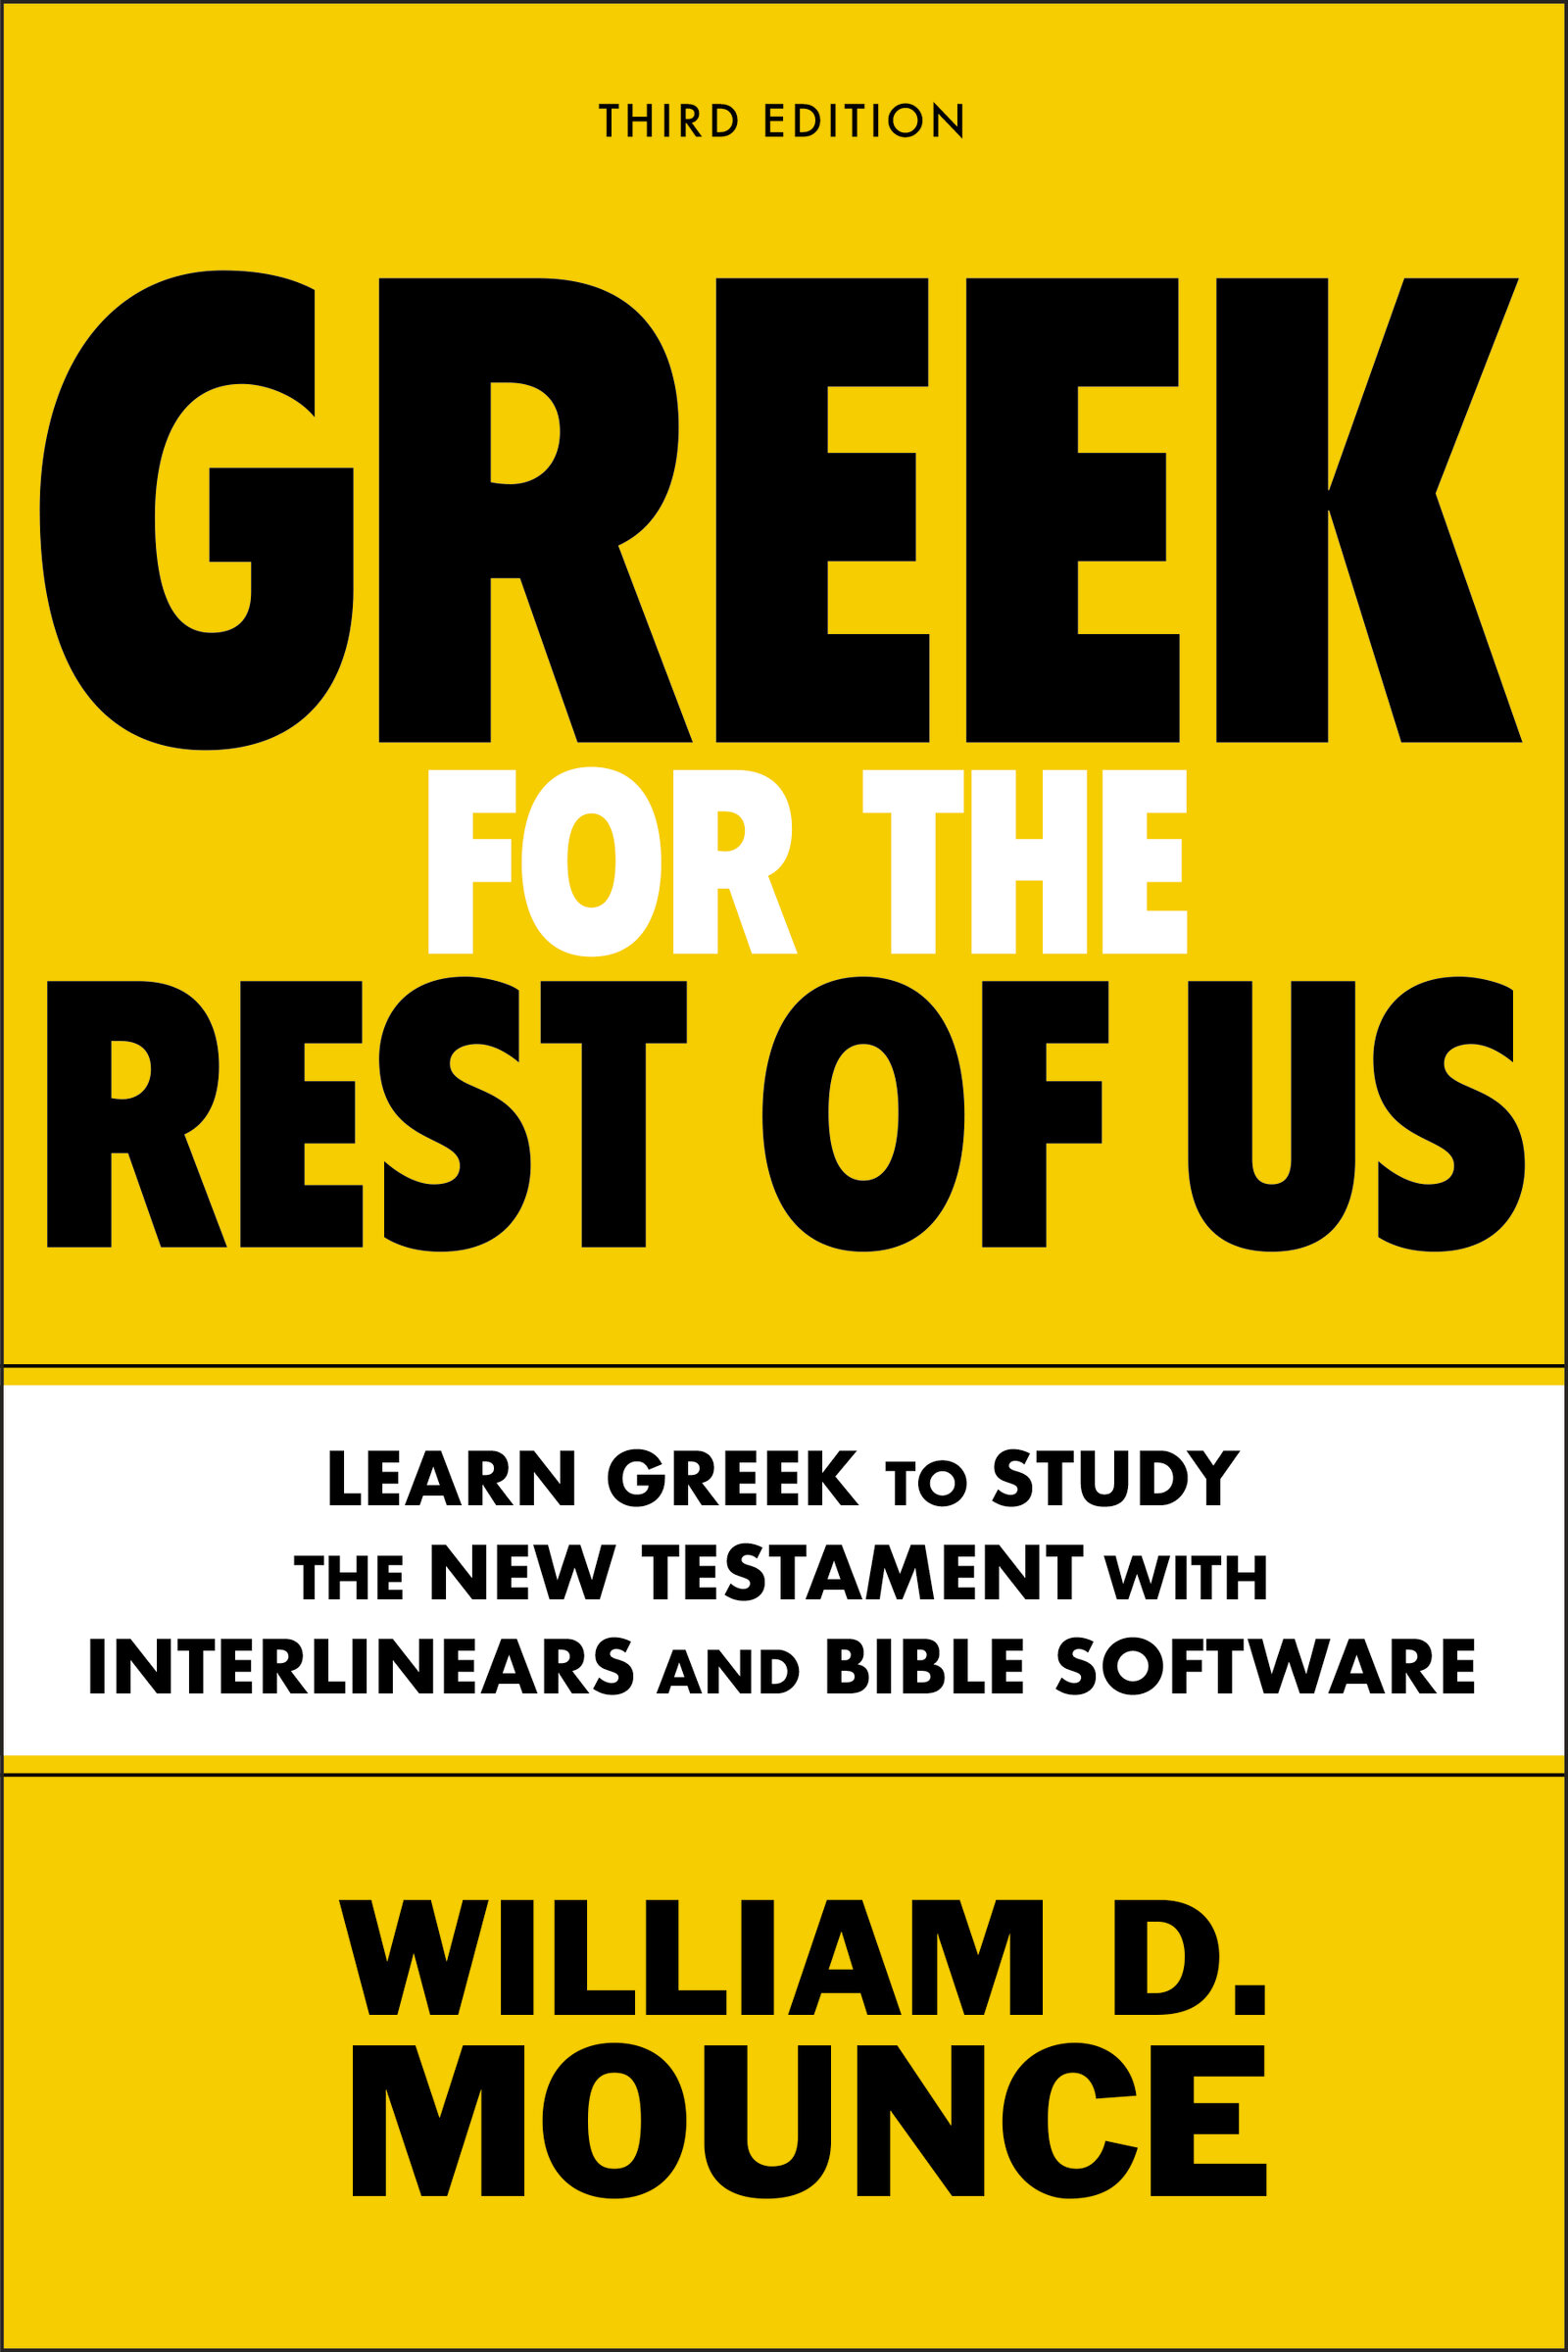 Greek for the Rest of Us: Learn Greek to Study the New Testament with Interlinears and Bible Software, 3rd ed.